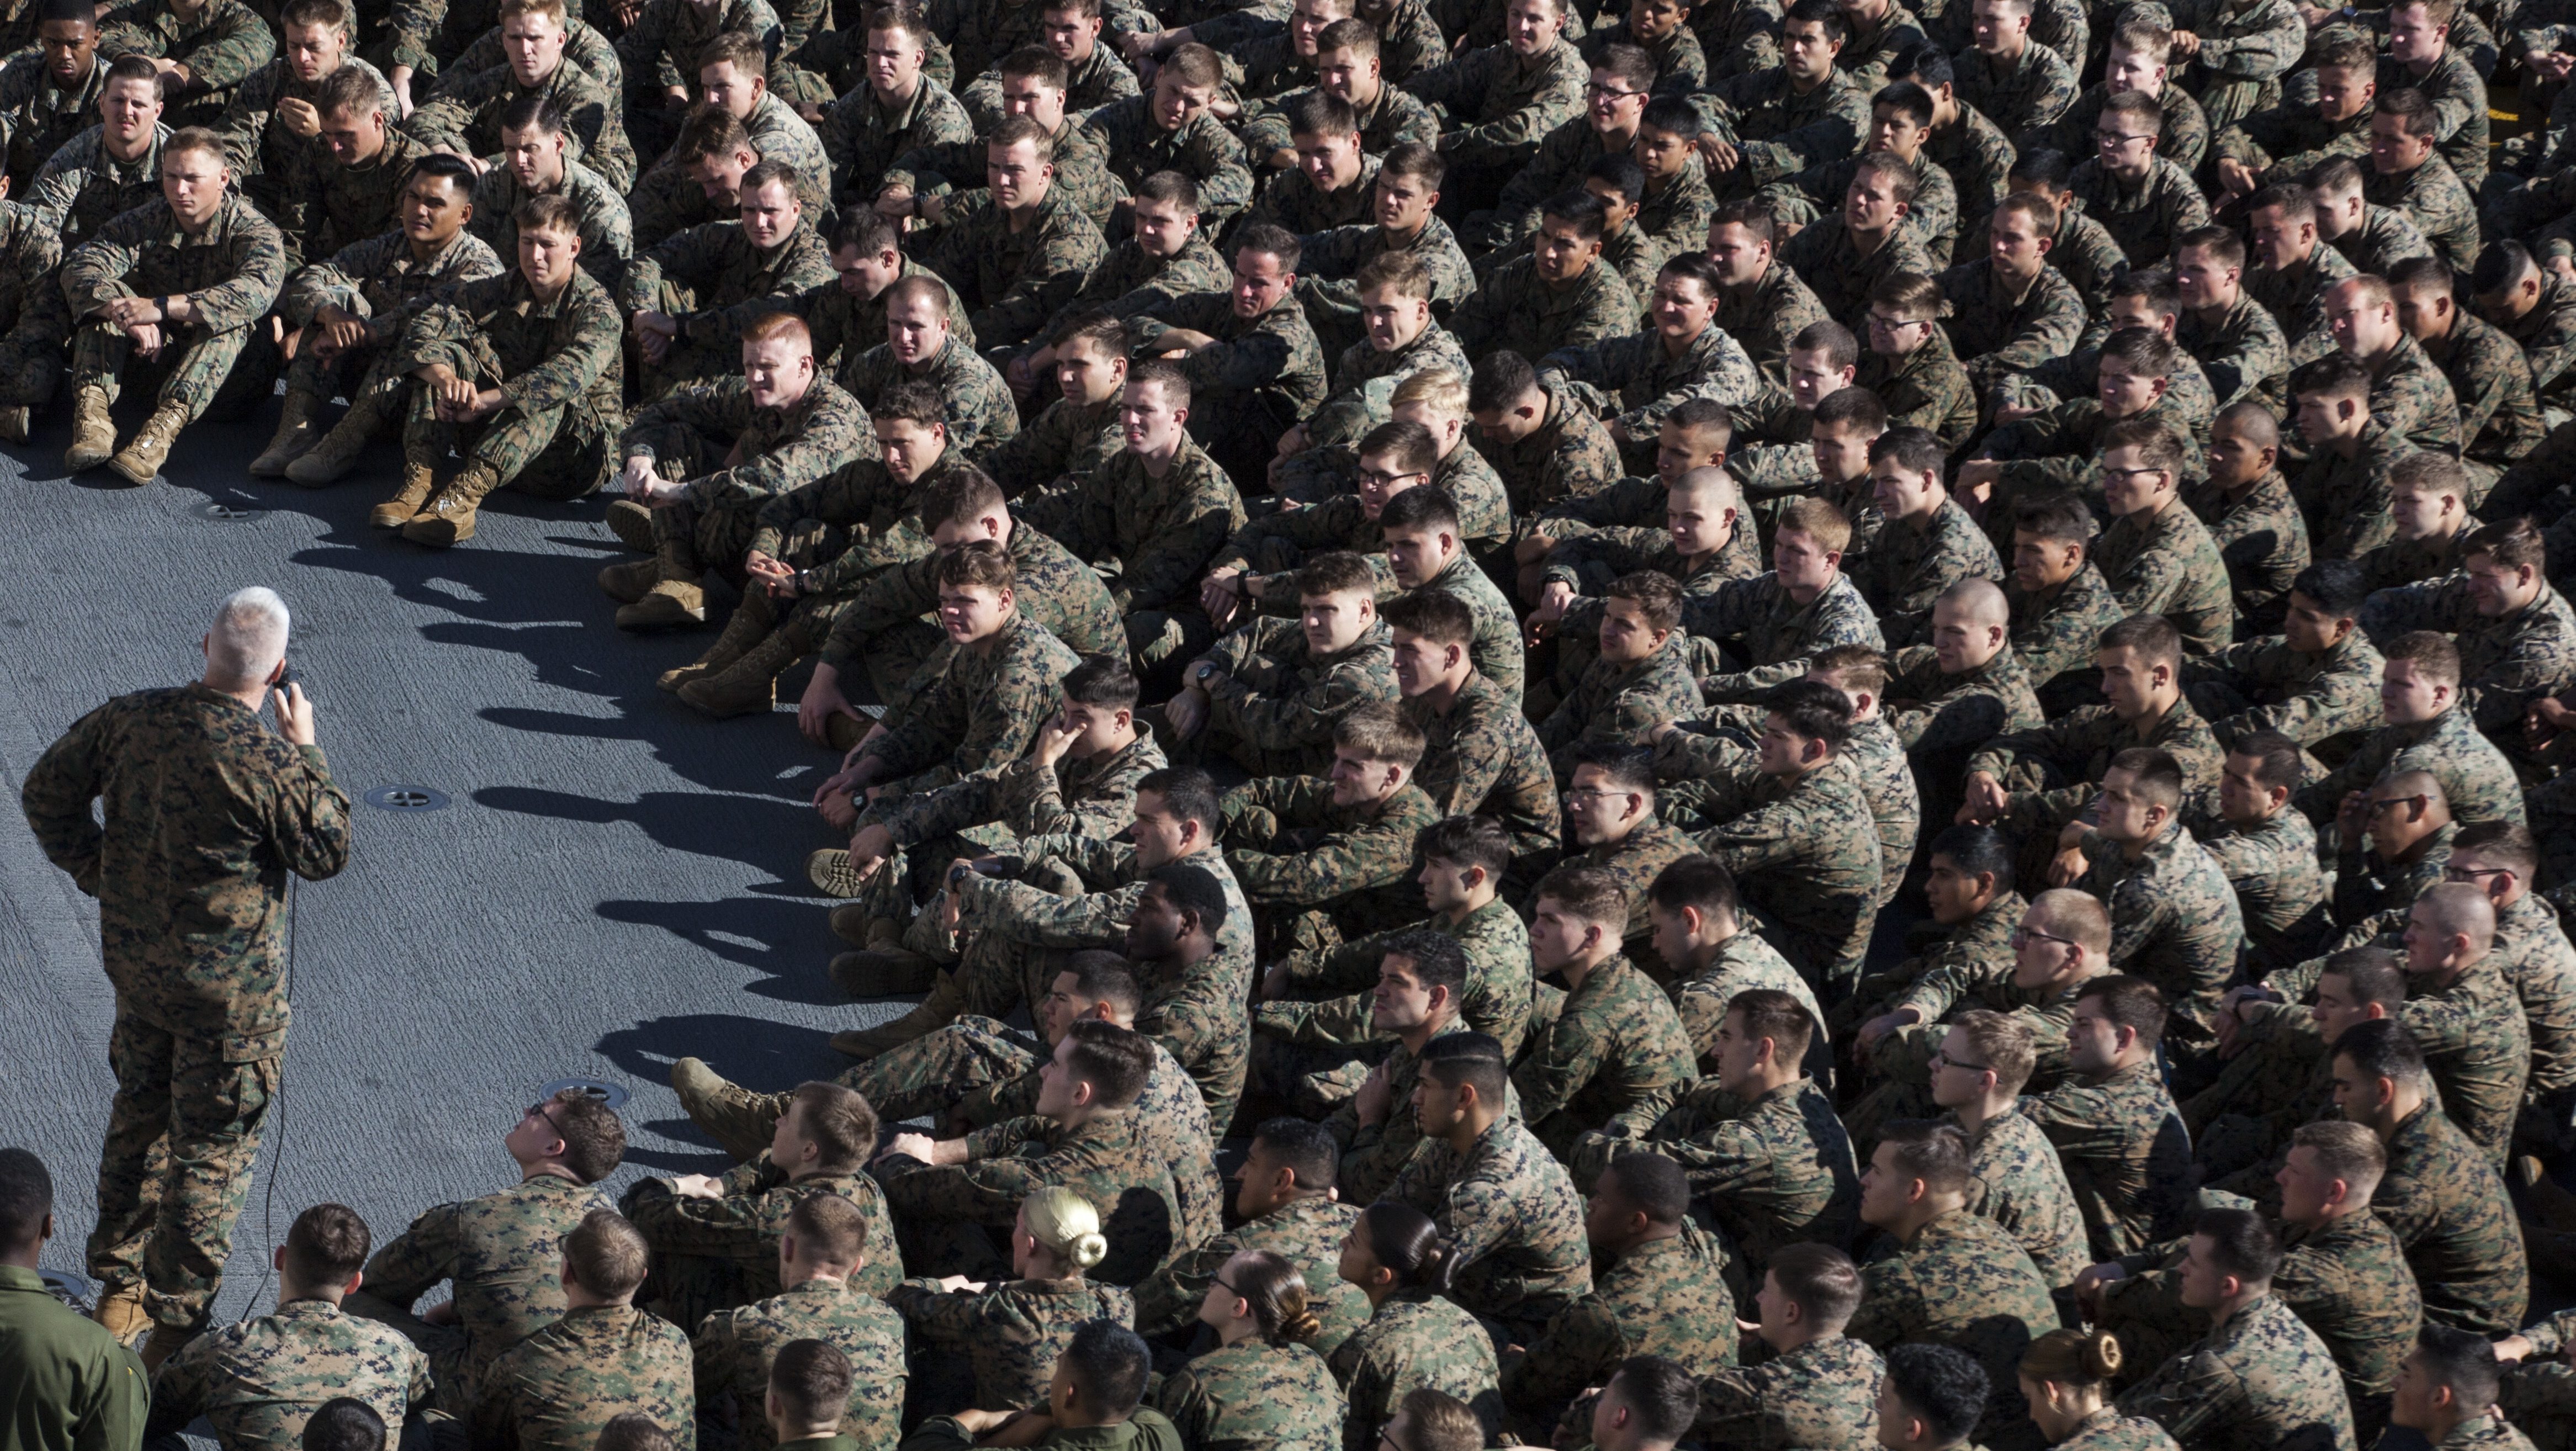 Sgt. Maj. Jim Lanham, sergeant major of the 31st Marine Expeditionary Unit, speaks to Marines during an all-hands formation aboard the USS Bonhomme Richard (LHD 6) while underway in the Pacific Ocean, July 26, 2017. Lanham and Col. Tye R. Wallace, commanding officer of the 31st MEU, encouraged the Marines and Sailors of the 31st MEU to continue to act as ambassadors of the Marine Corps. The 31st MEU partners with the Navy’s Amphibious Squadron 11 to form the amphibious component of the Bonhomme Richard Expeditionary Strike Group. The 31st MEU and PHIBRON 11 combine to provide a cohesive blue-green team capable of accomplishing a variety of missions across the Indo-Asia-Pacific region. (U.S. Marine Corps photo by Lance Cpl. Stormy Mendez/Released)